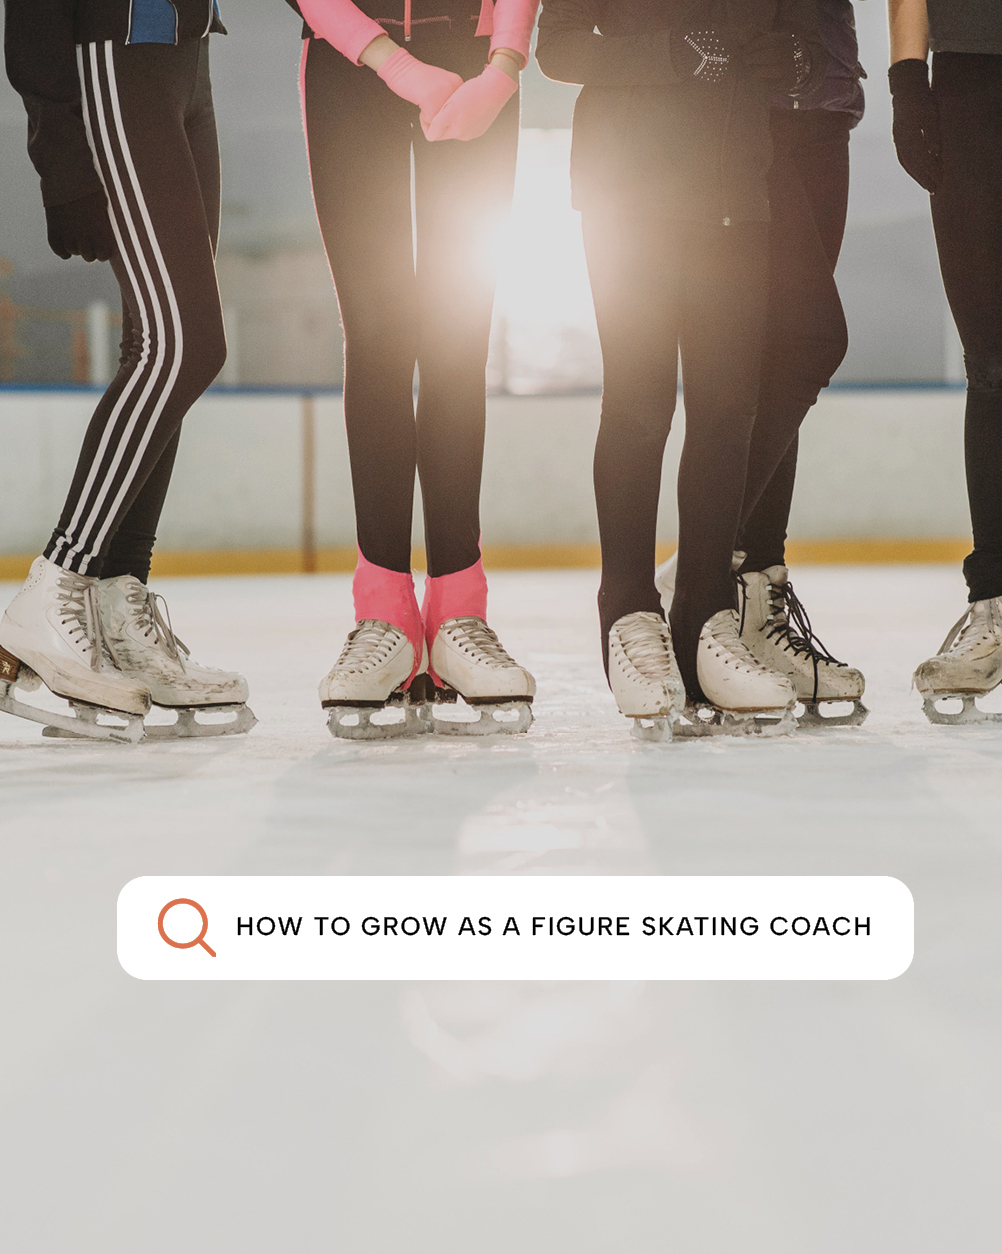 Figure skaters legs and skates with a search bar that says "how to grow as a figure skating coach"